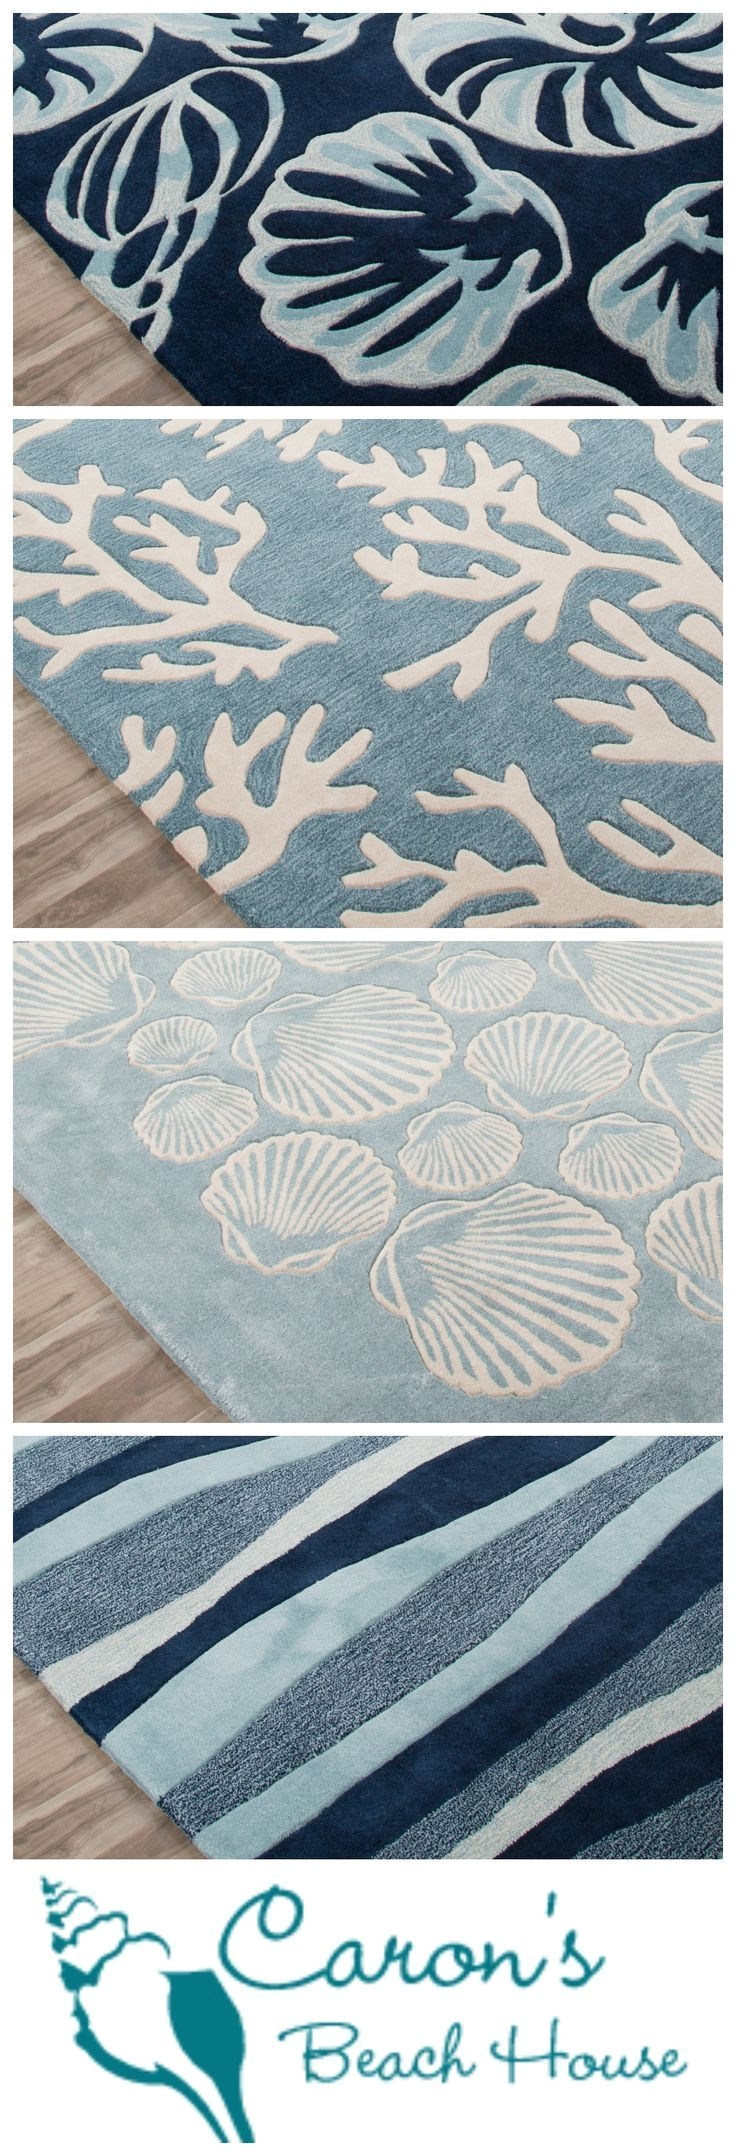 create your own coastal retreat without ever leaving home try a new blue plush coastal area rug the post need a seaside escape